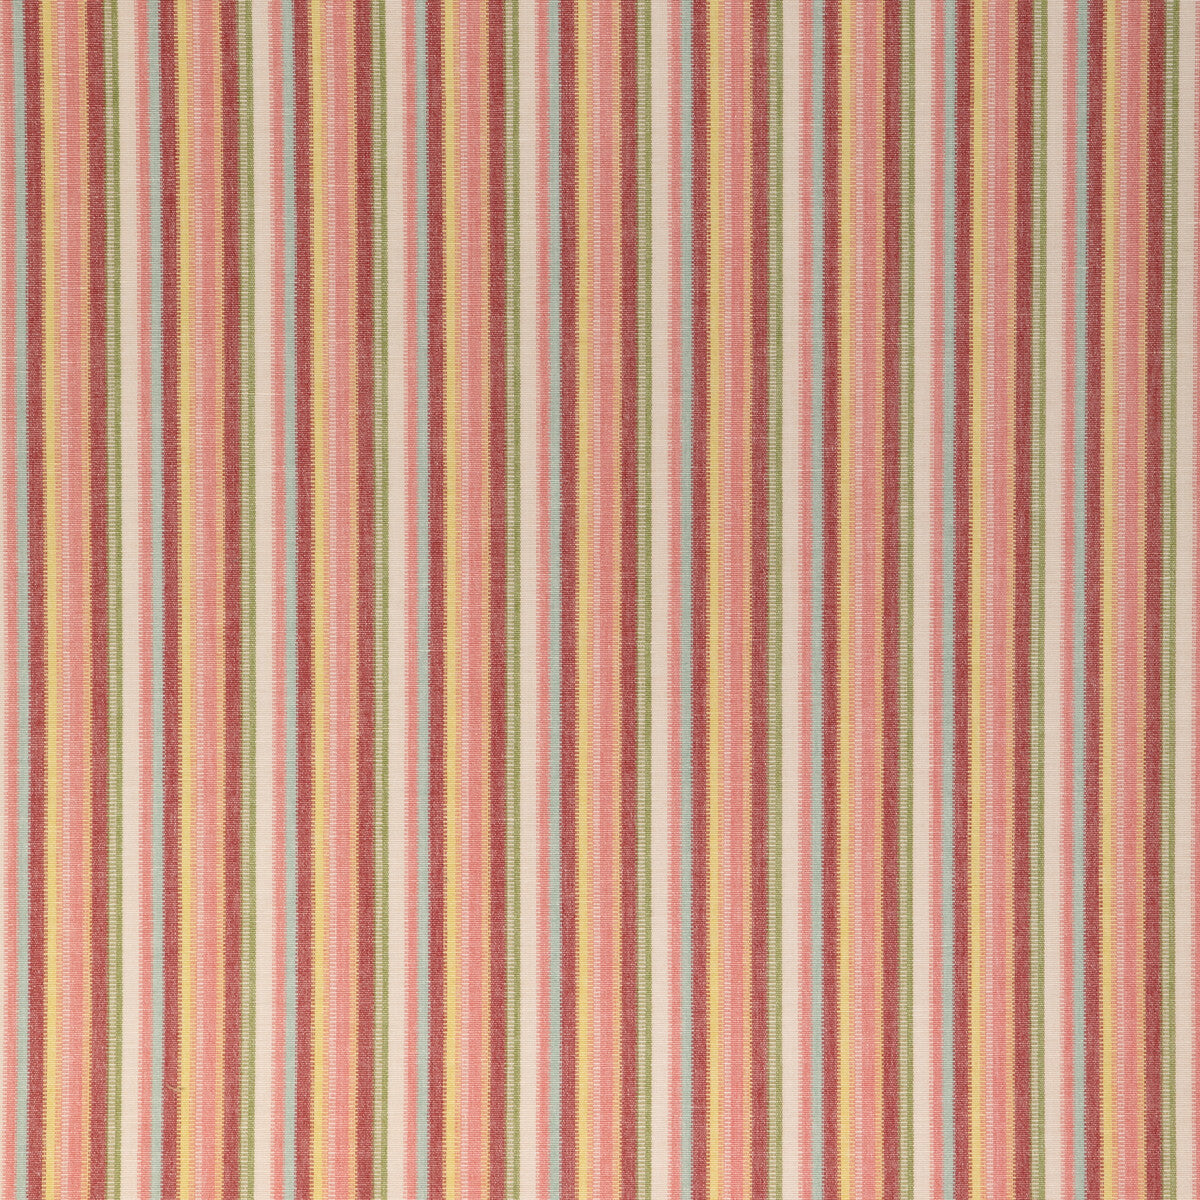 Sandbanks Stripe fabric in red/rose color - pattern 2023105.197.0 - by Lee Jofa in the Highfield Stripes And Plaids collection